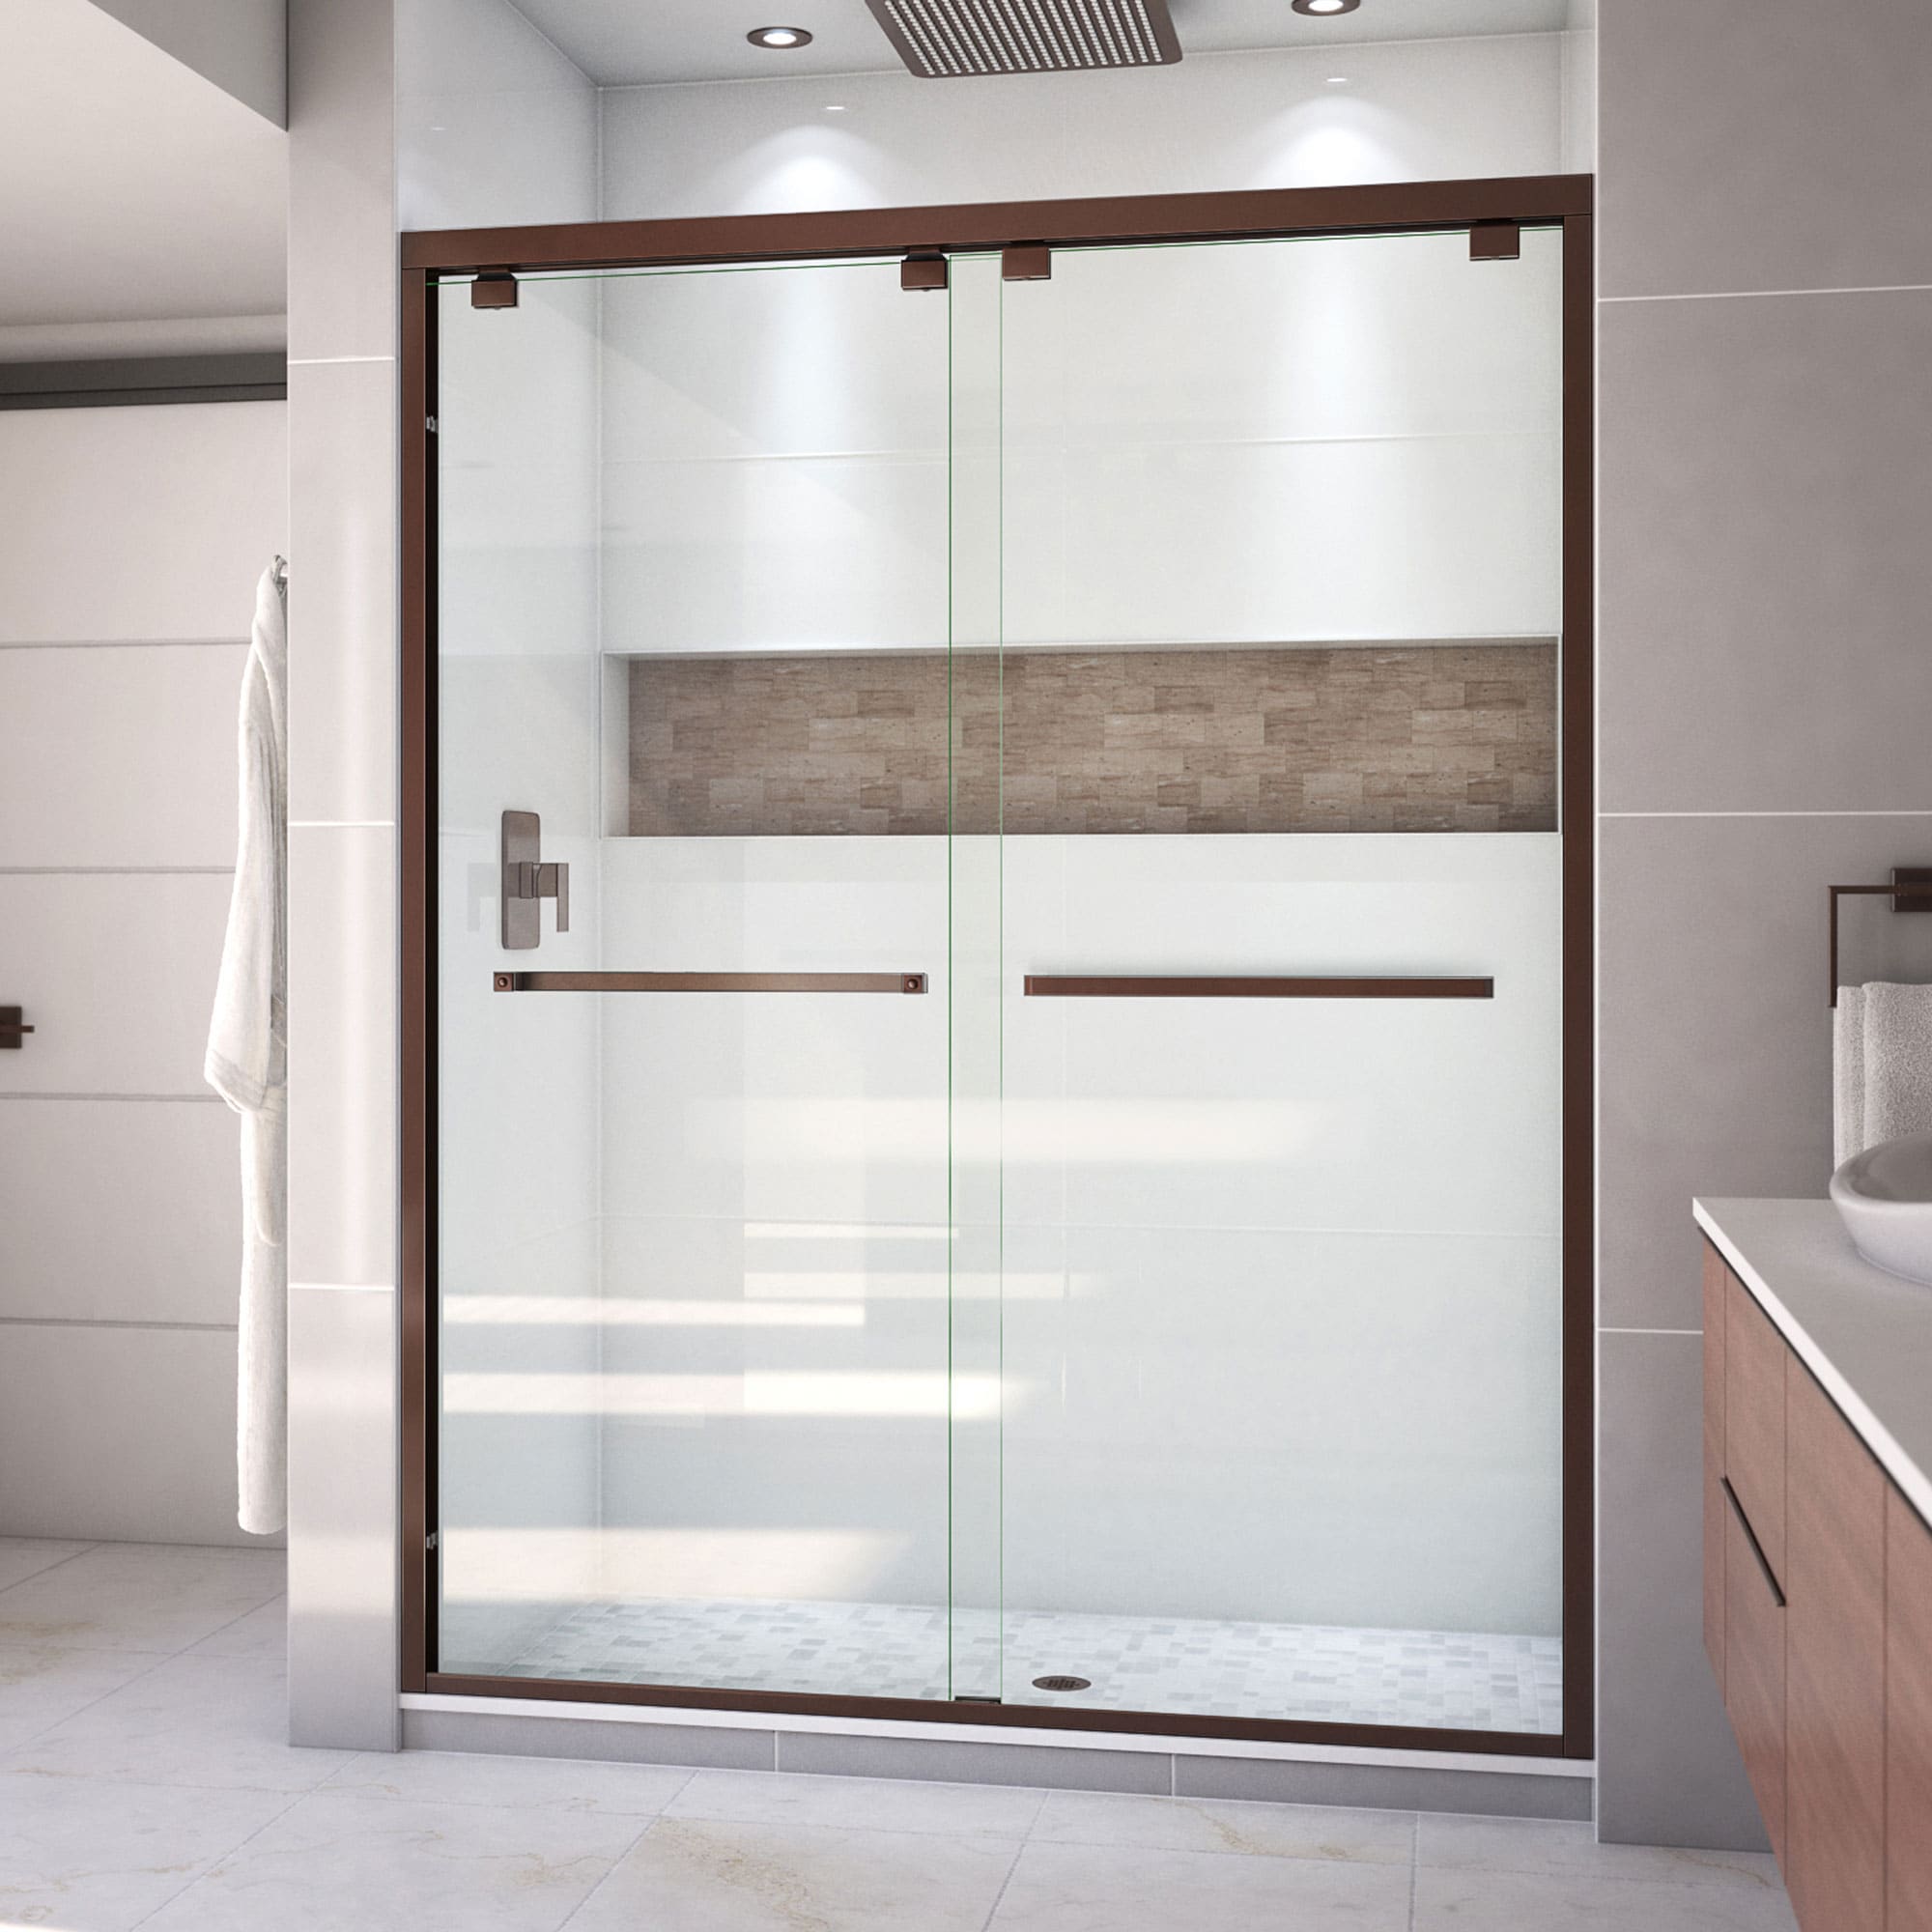 Transform Your Bathroom with a Stunning Oil Rubbed Bronze Finish Shower Door